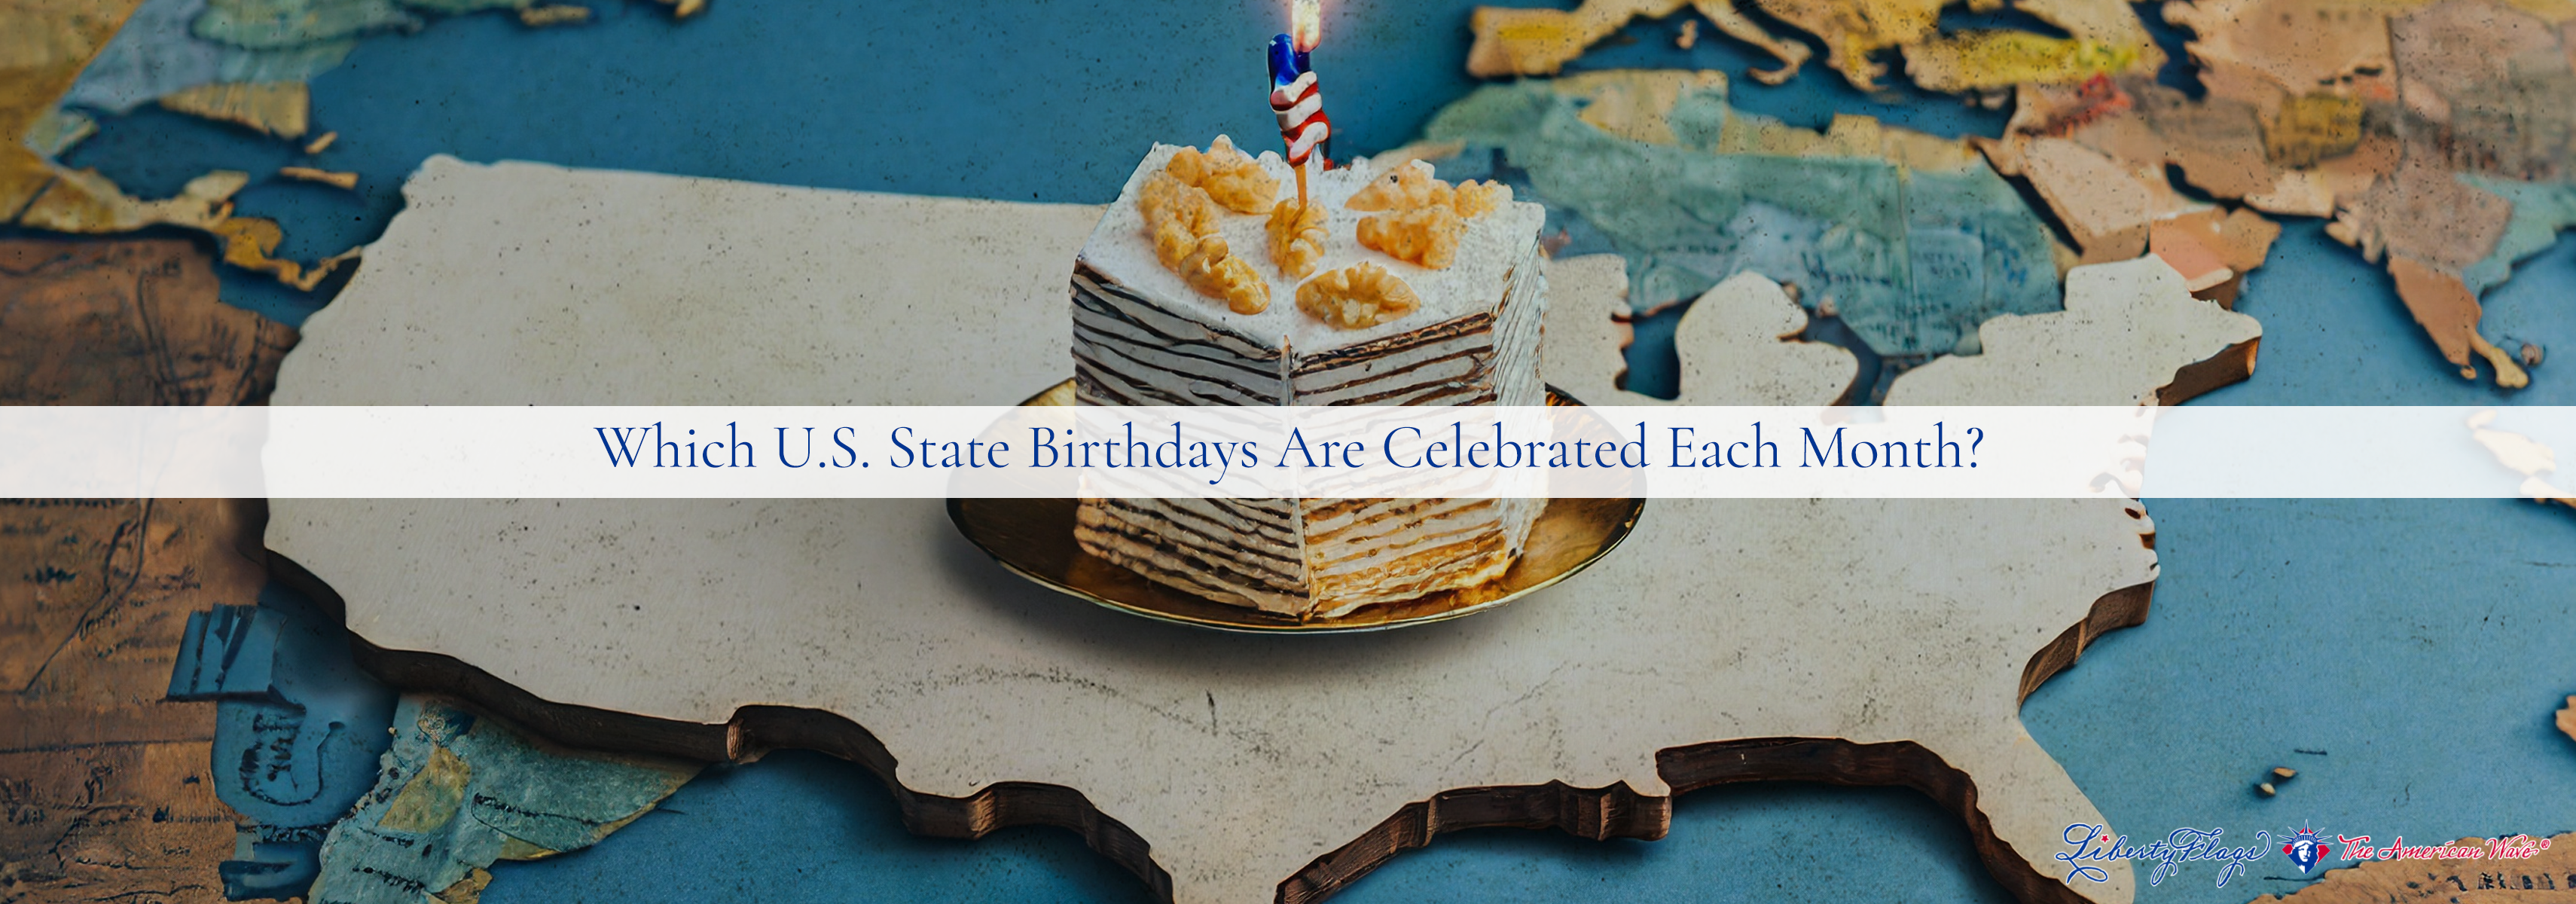 “These State Birthdays are celebrated each month, with LIBERTY FLAGS, The American Wave®